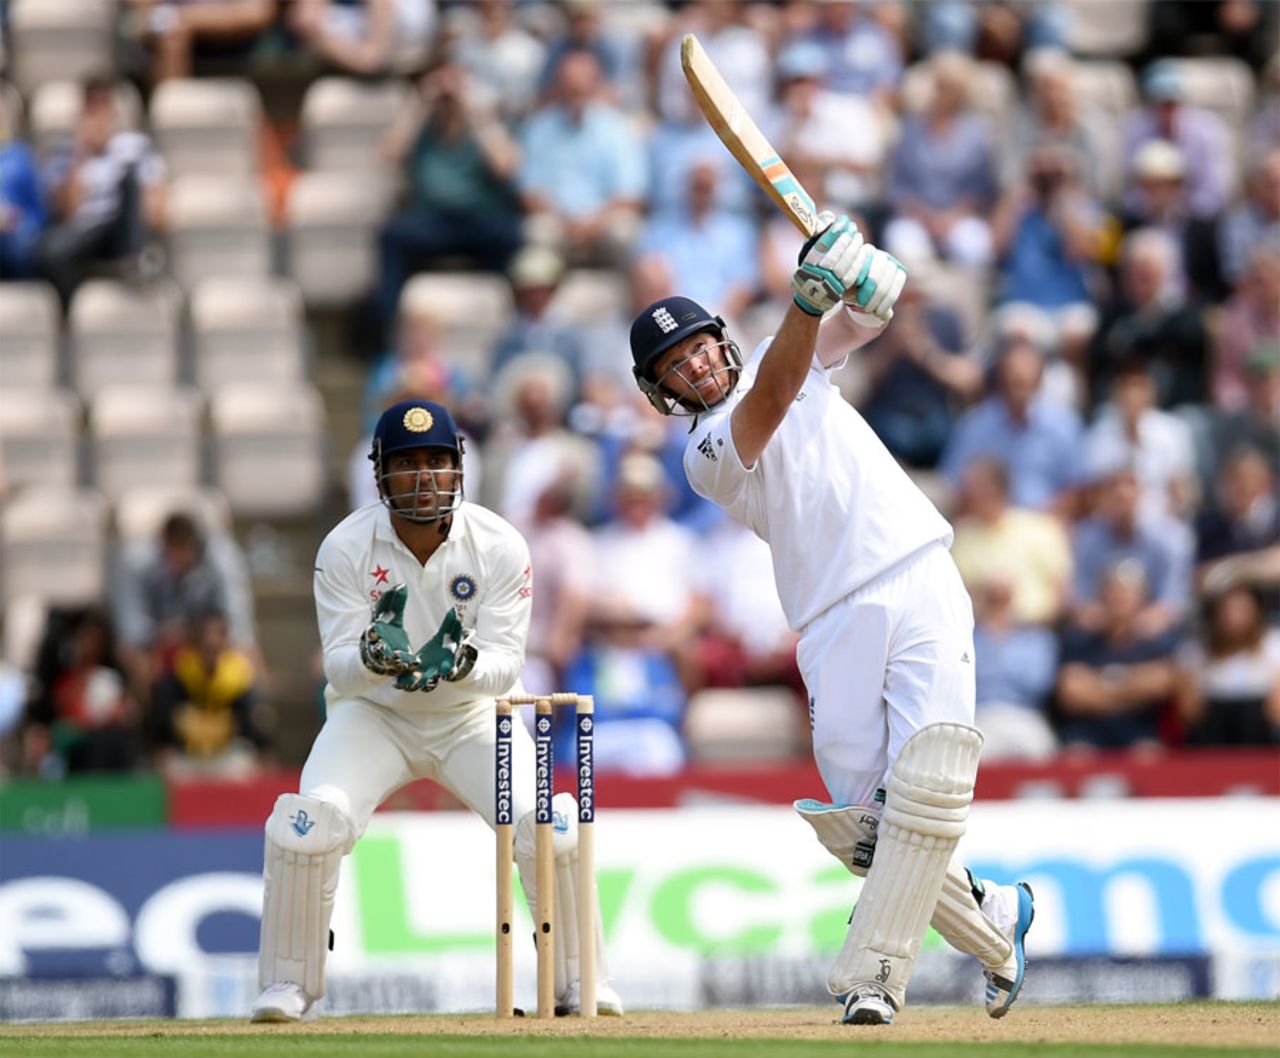 Ian Bell used his feet well against the spinners, England v India, 3rd Investec Test, Ageas Bowl, 2nd day, July 28, 2014